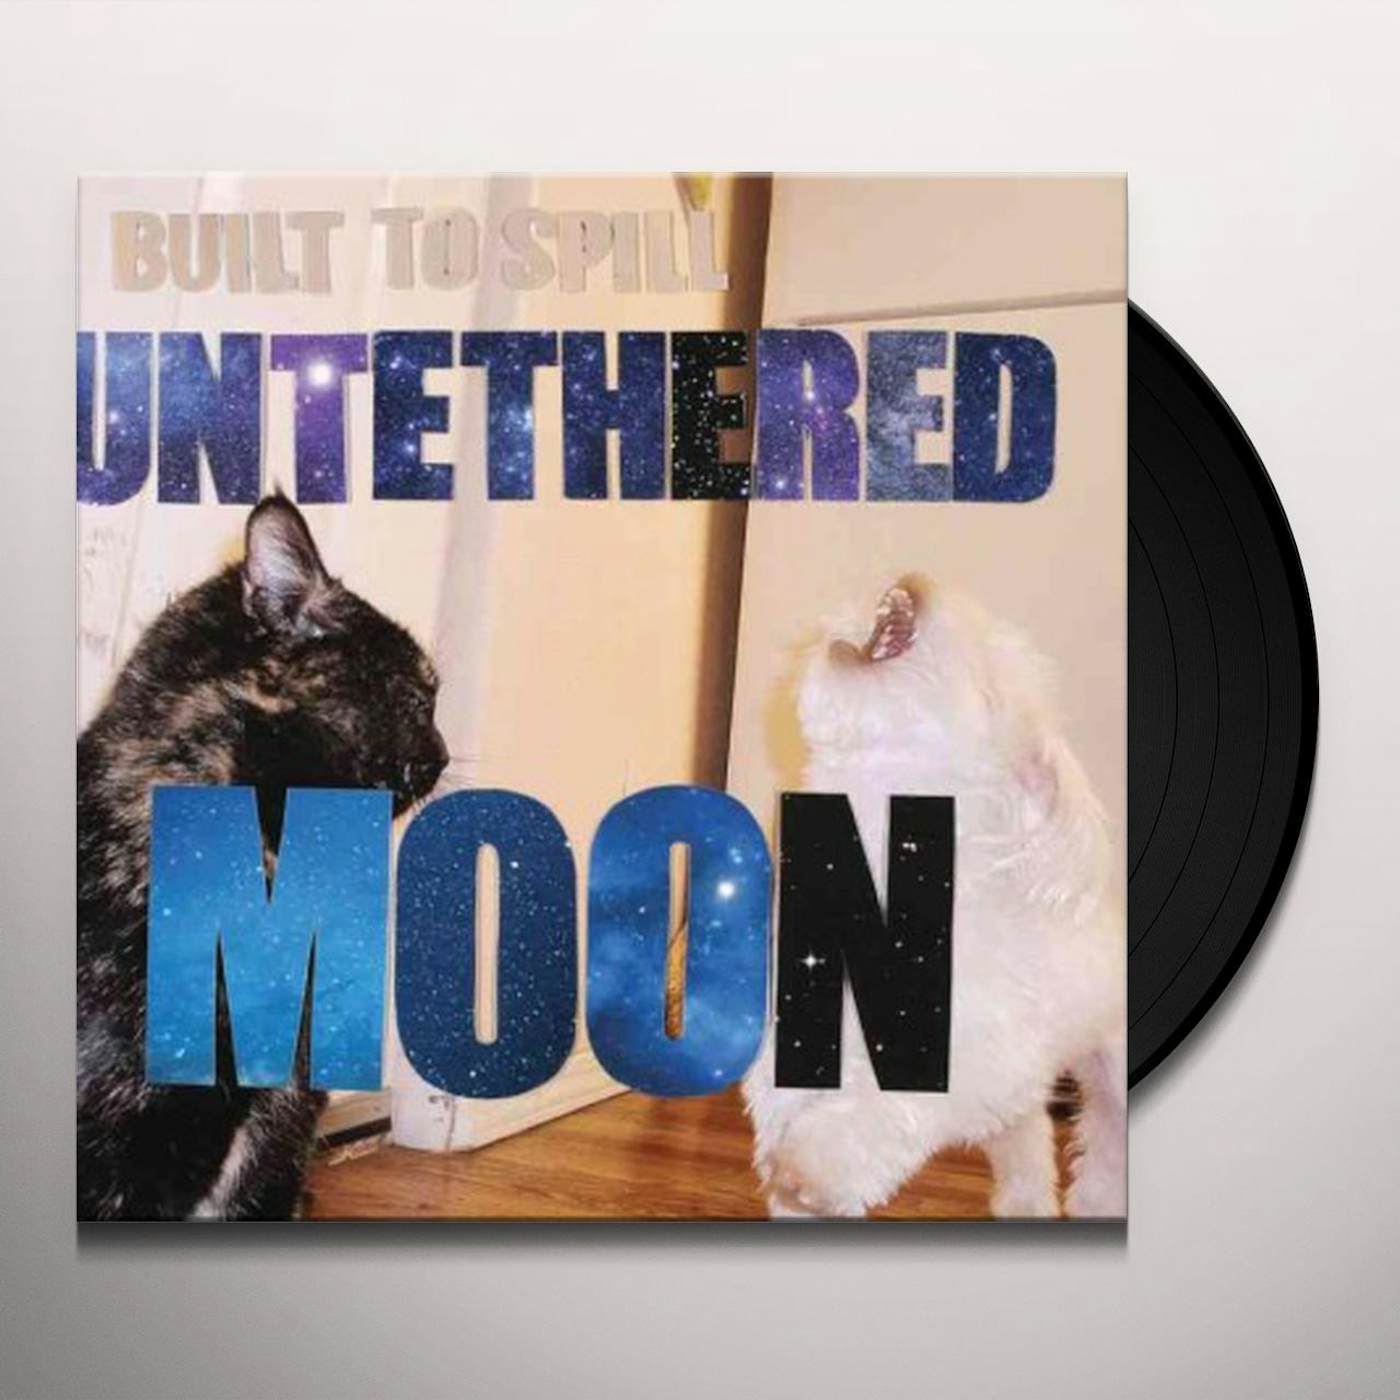 Built To Spill Untethered Moon Vinyl Record